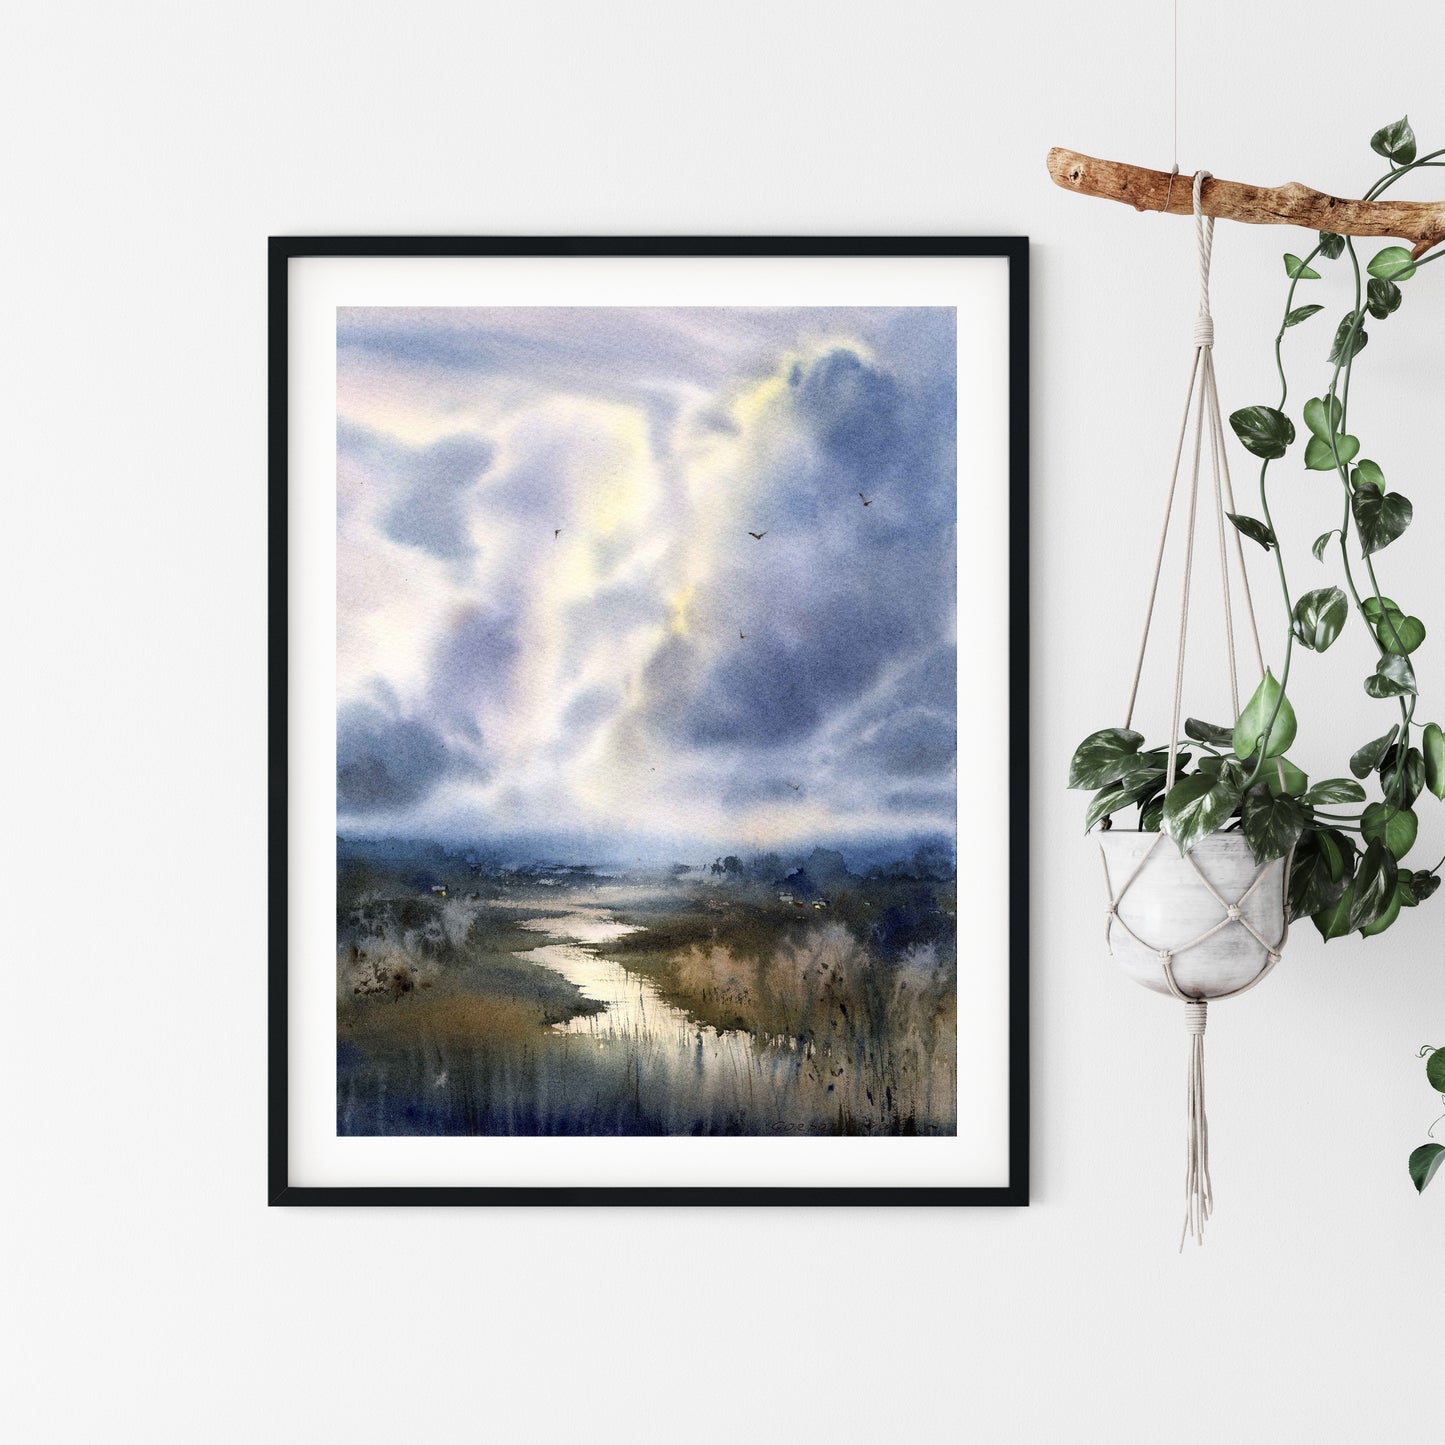 Contemporary Landscape Wall Art, Country Art Print, Rainy Day Watercolor Scenery Painting, Dark Blue Clouds on Canvas